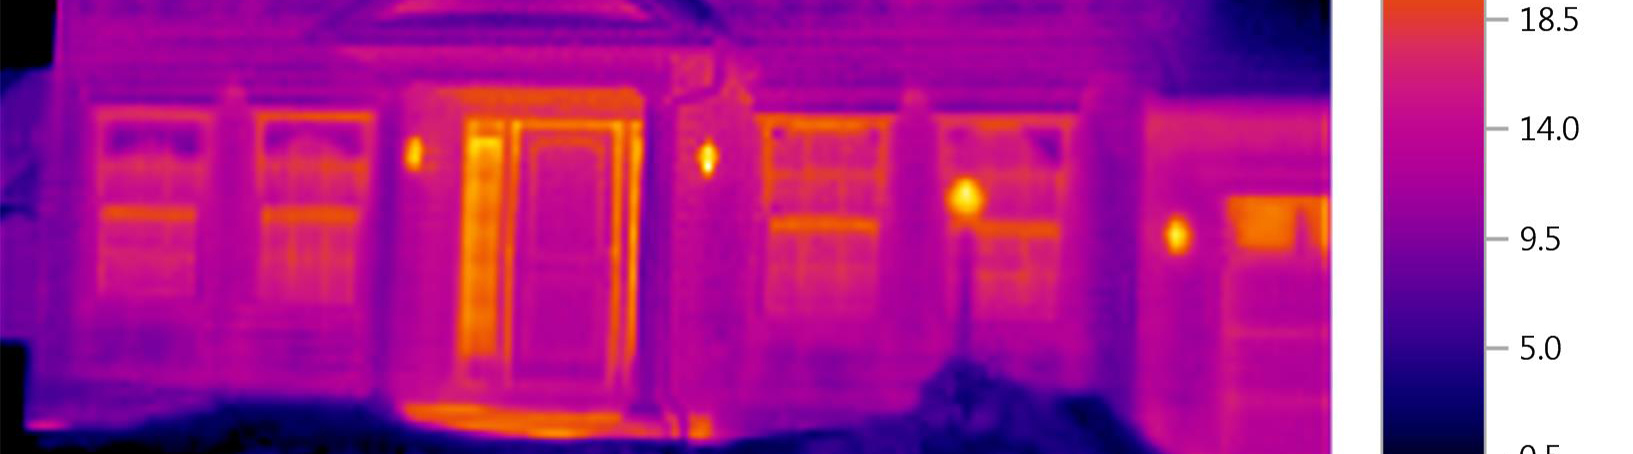 Infrared scan of exterior of home